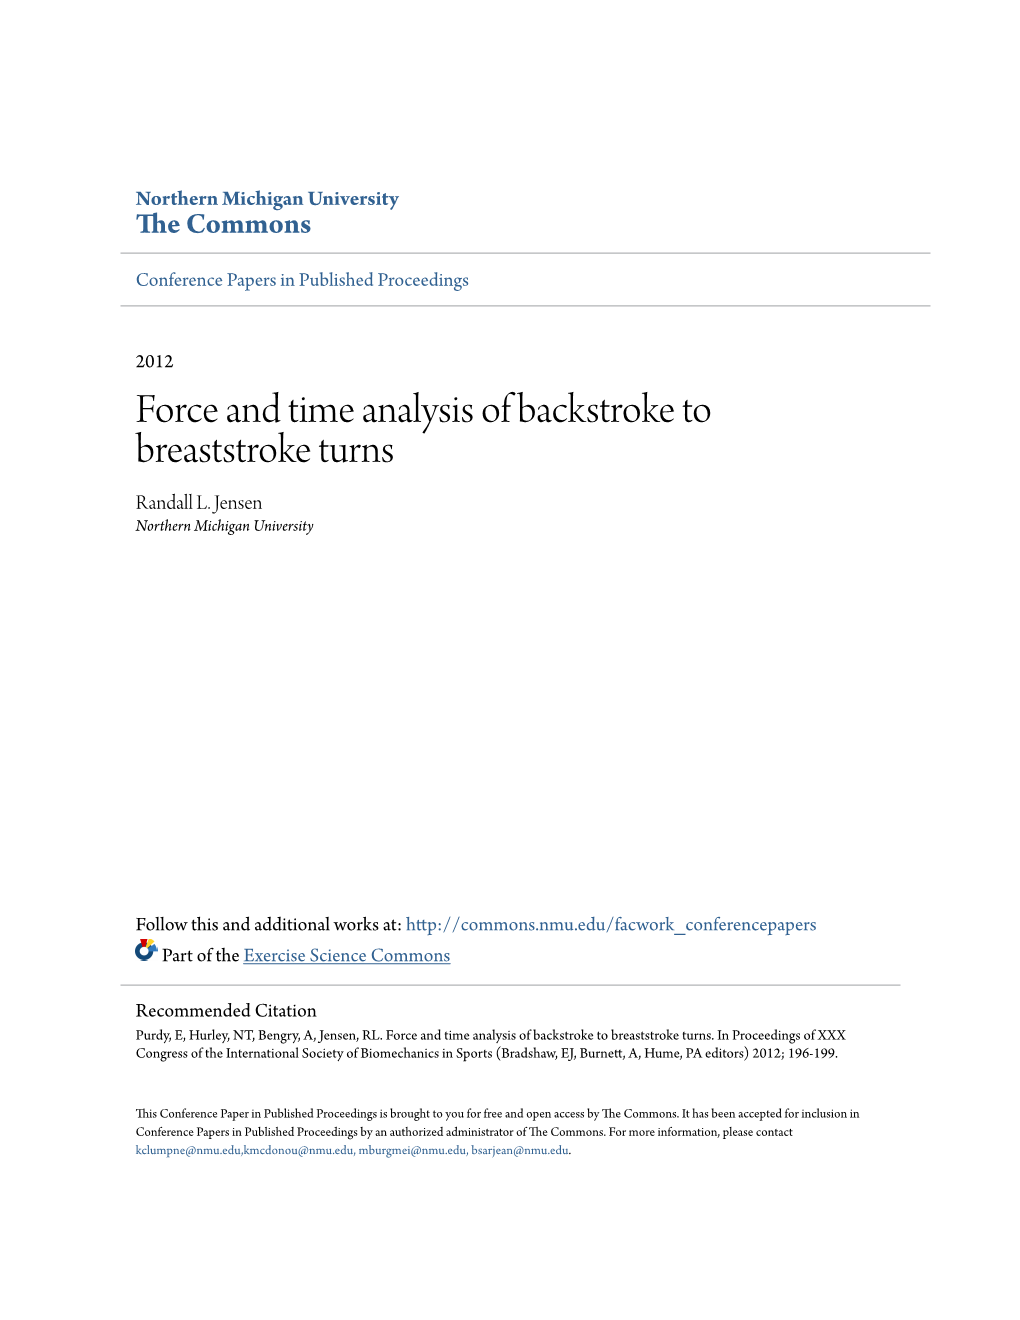 Force and Time Analysis of Backstroke to Breaststroke Turns Randall L